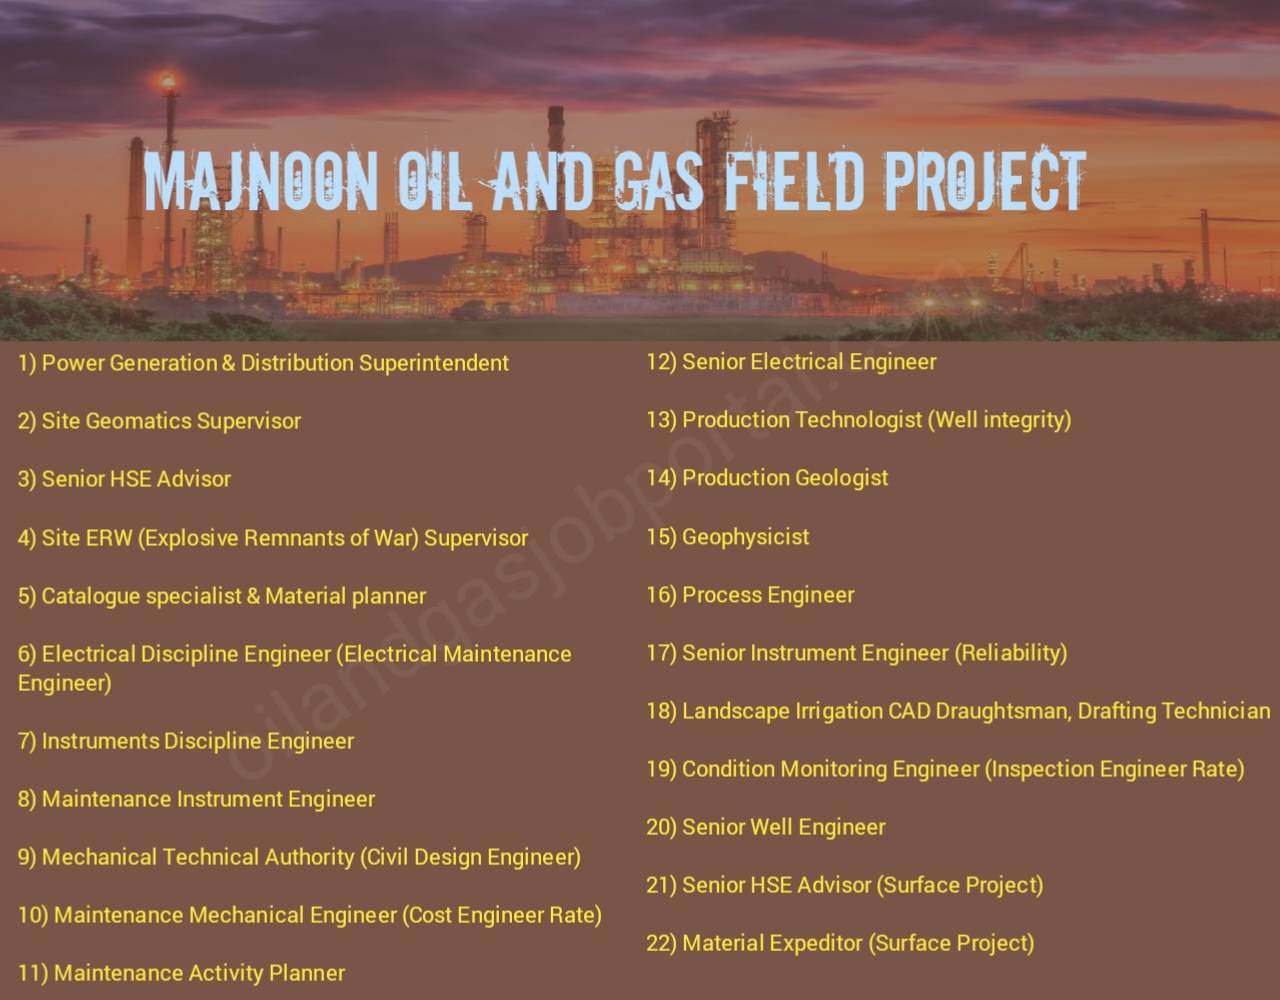 Majnoon Oil and Gas Field Project announces excellent job opportunities for qualified candidates 